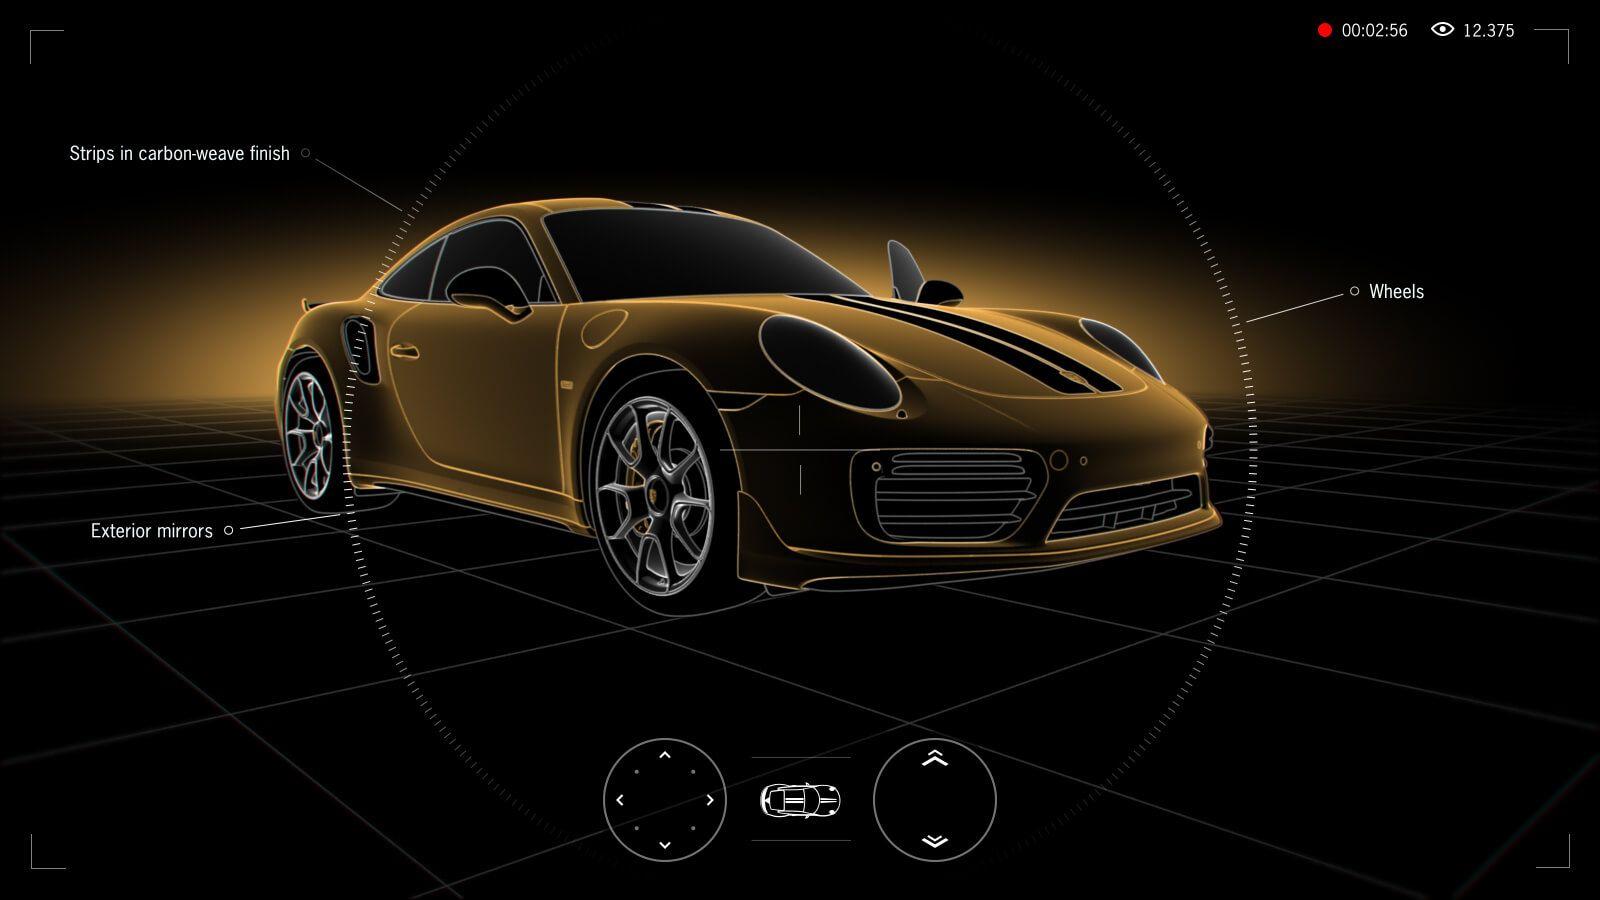 Exceptional. 911 Turbo S Exclusive Series. Ing. h.c. F. Porsche AG